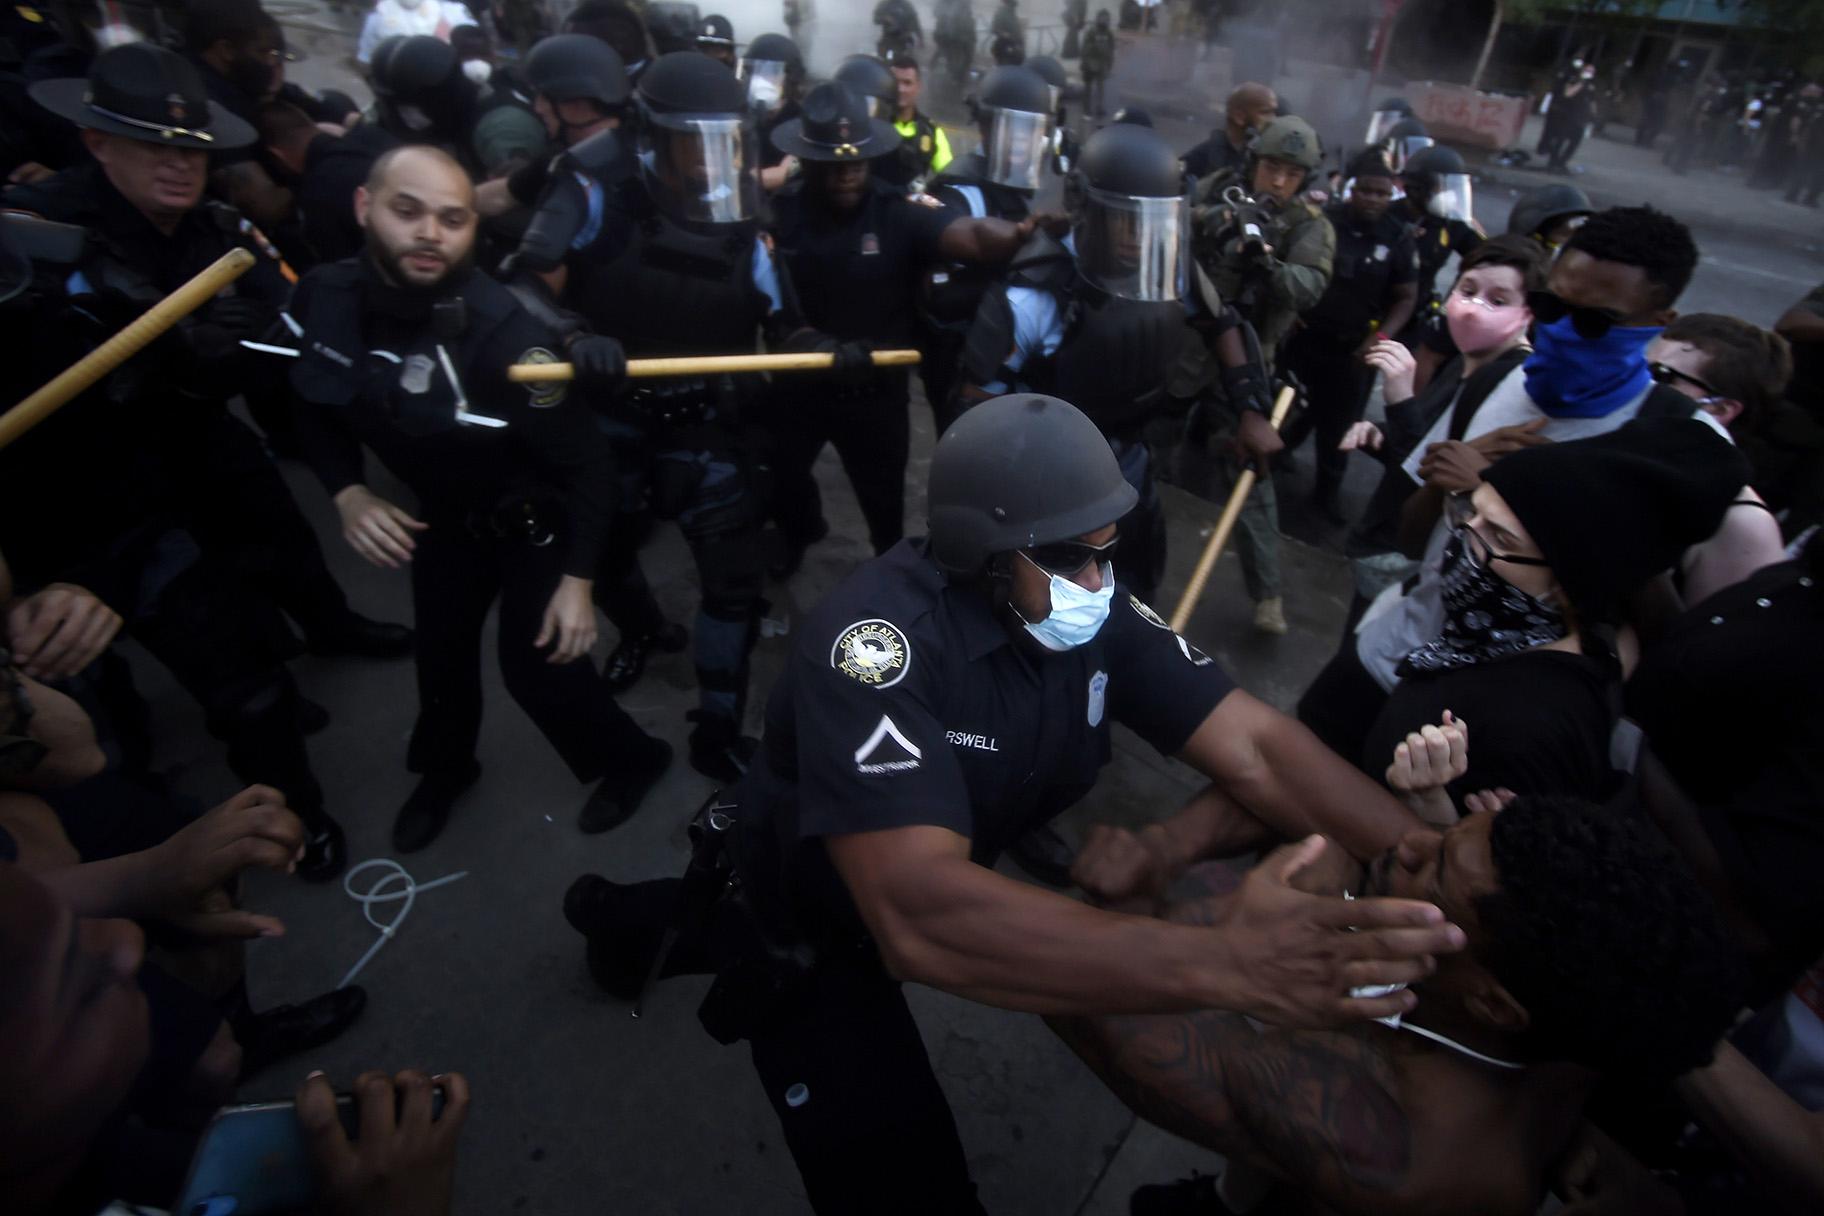 Police officers and protesters clash near CNN Center, Friday, May 29, 2020, in Atlanta, in response to George Floyd’s death in police custody in Minneapolis on Memorial Day. The protest started peacefully earlier in the day before demonstrators clashed with police. (AP Photo / Mike Stewart)